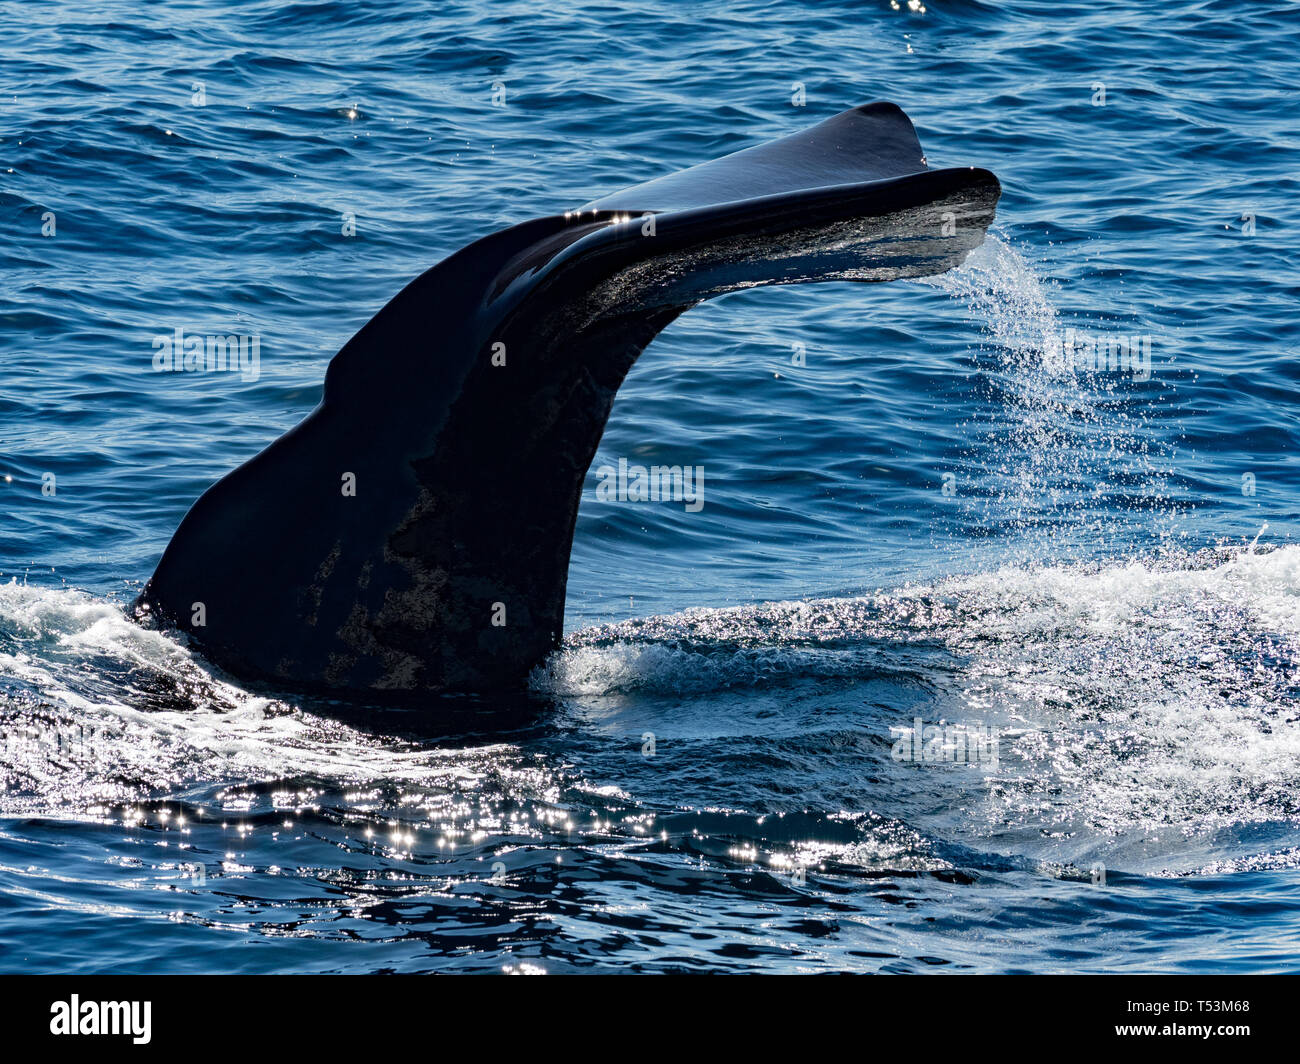 A sperm whale, Physeter macrocephalus, largest toothed whale, showing ...